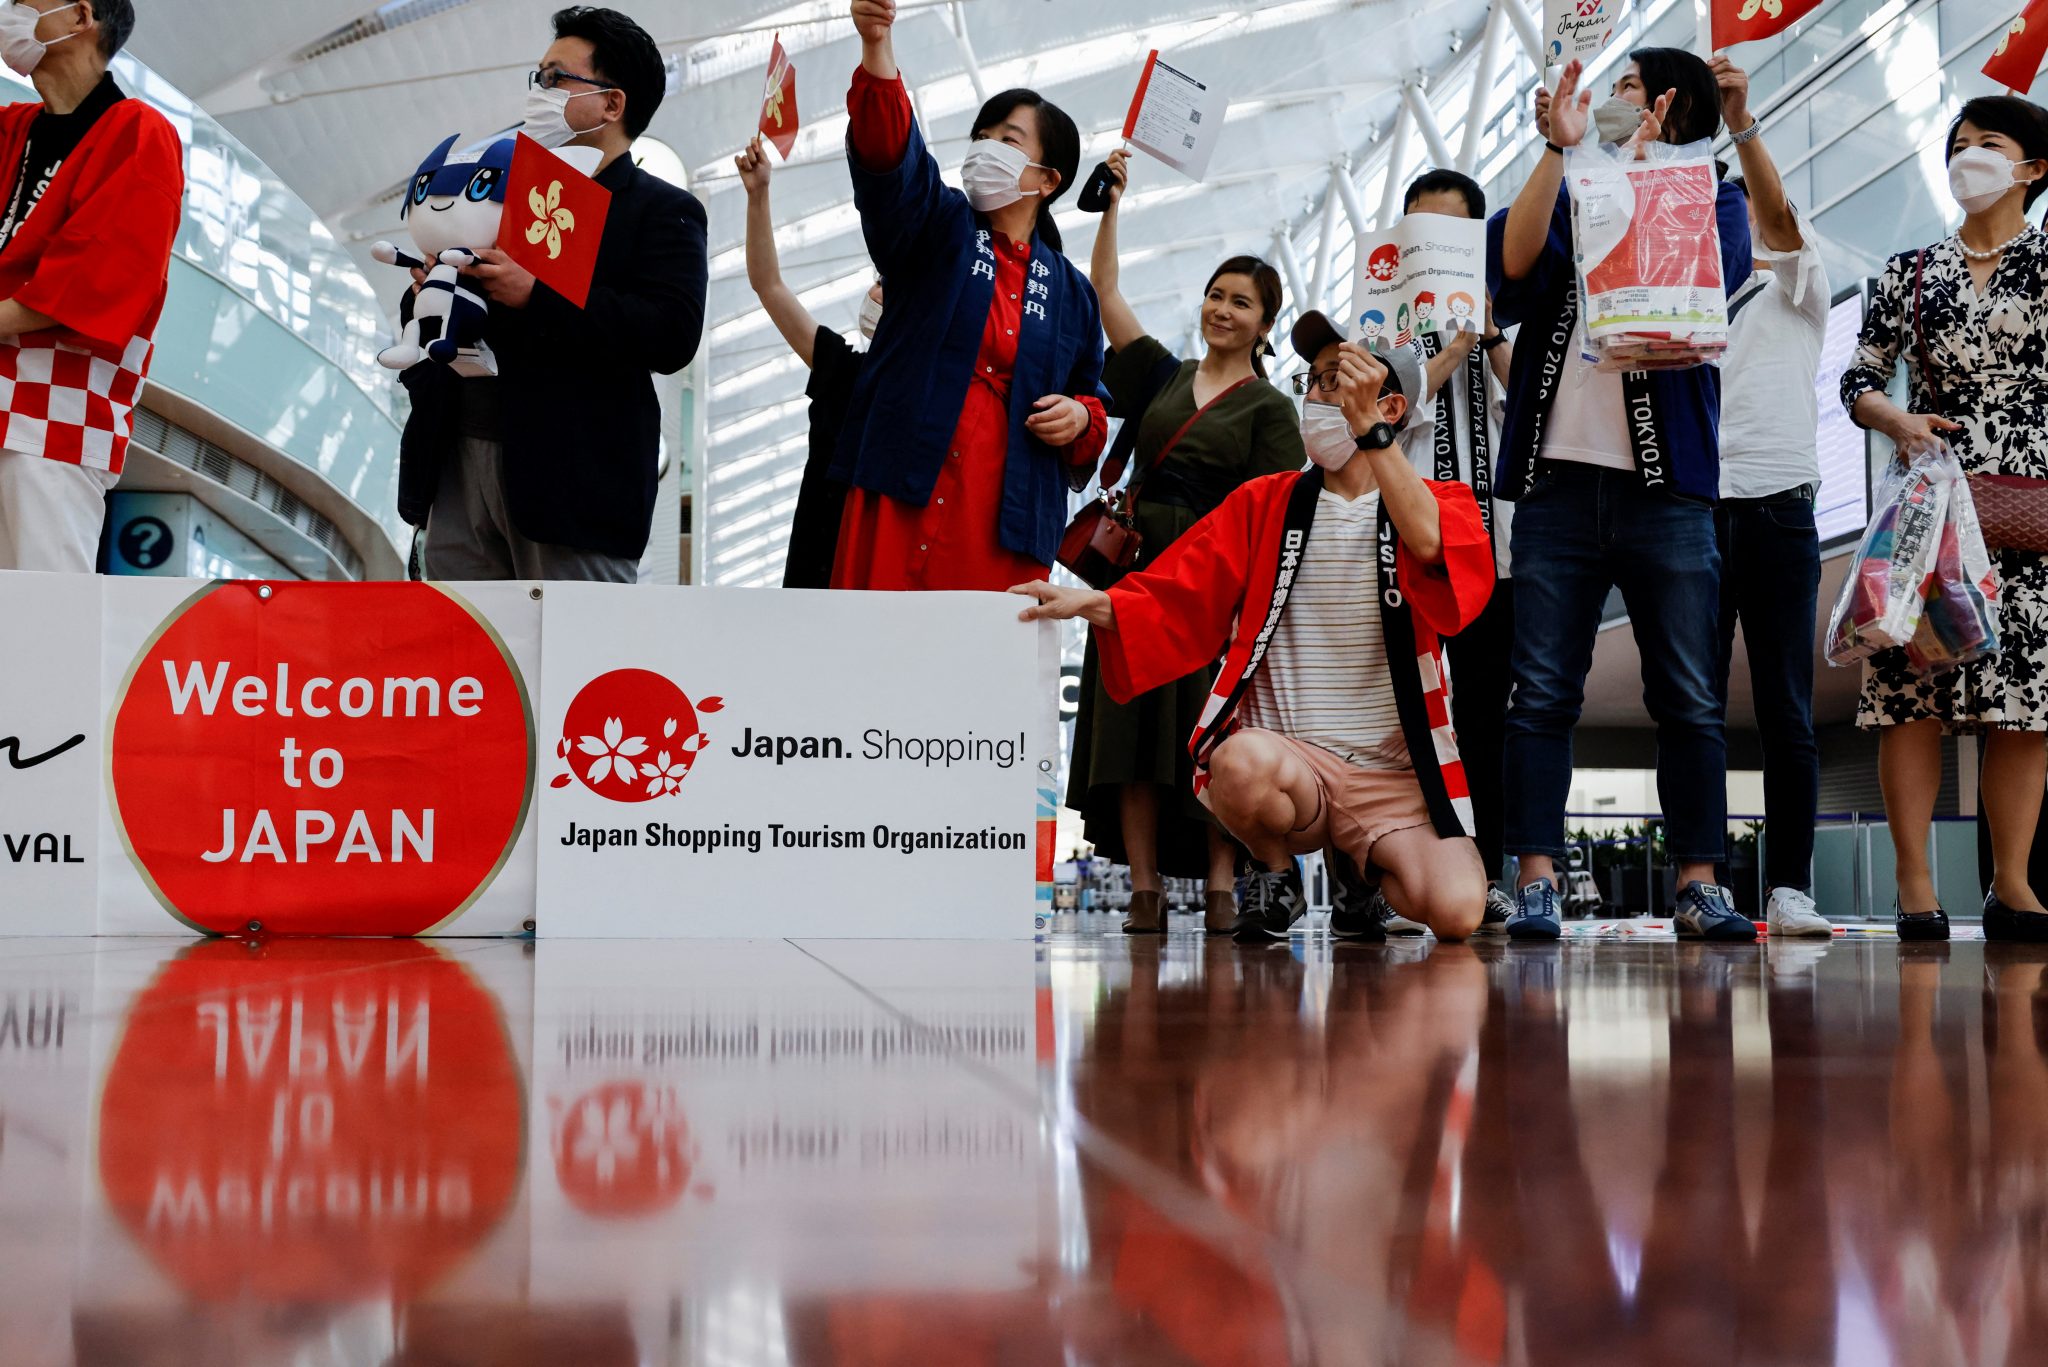 The prospects of Japan’s post&pandemic tourism